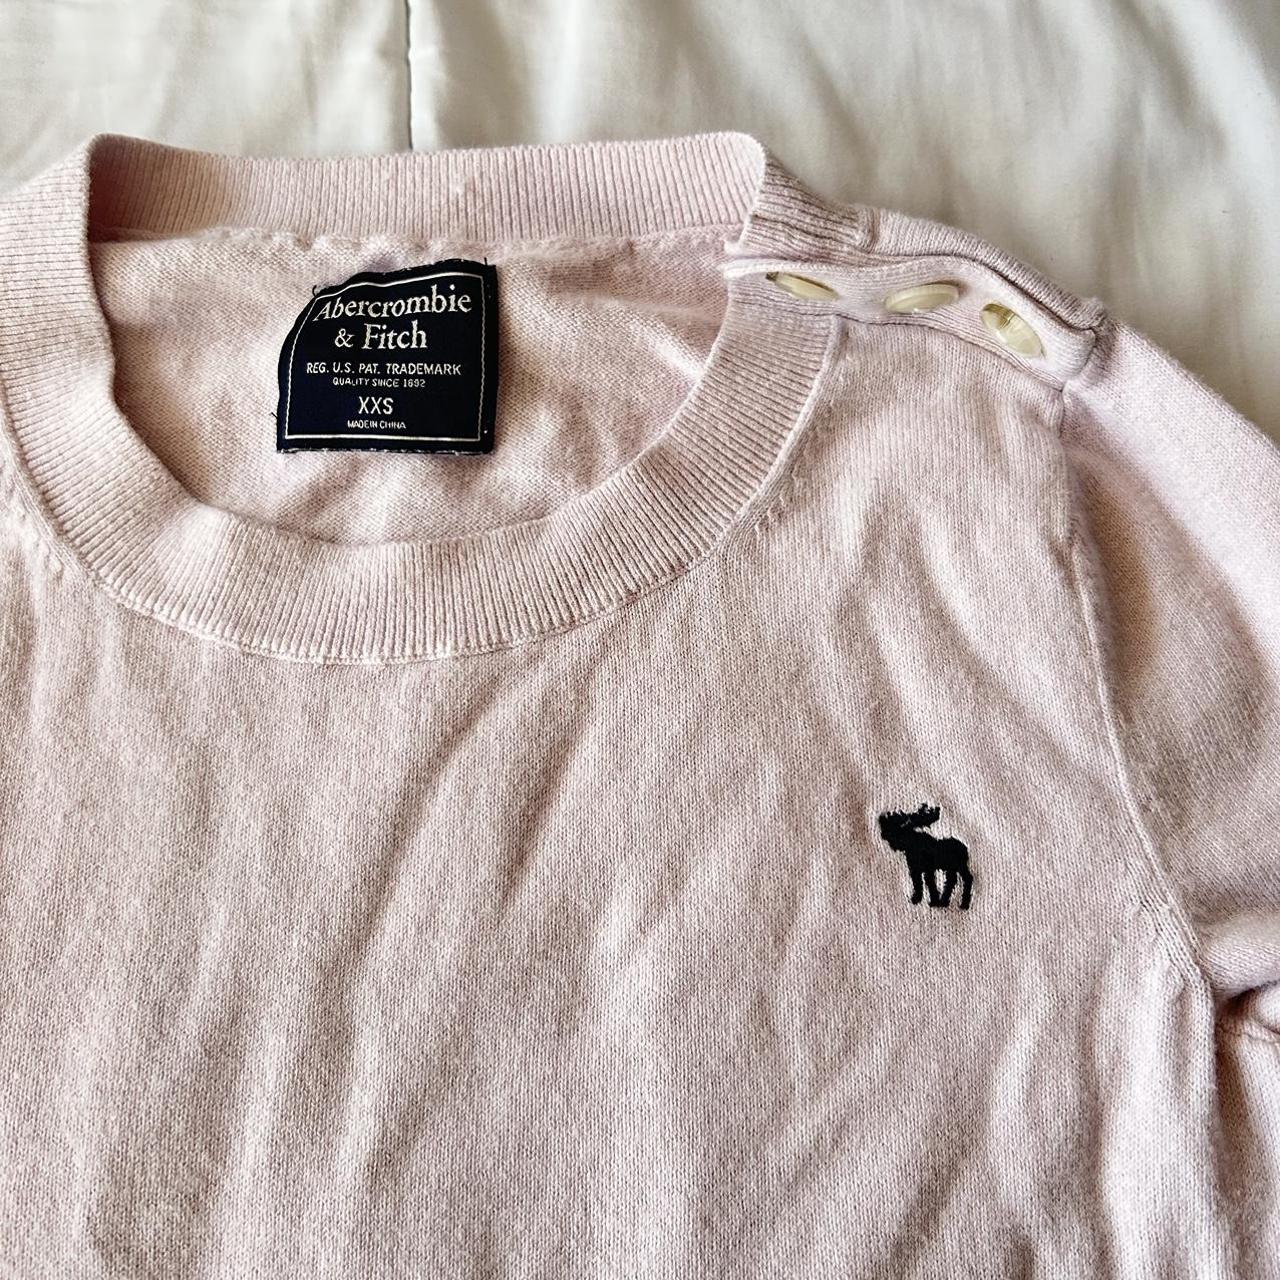 Abercrombie & Fitch Women's Pink Shirt (2)